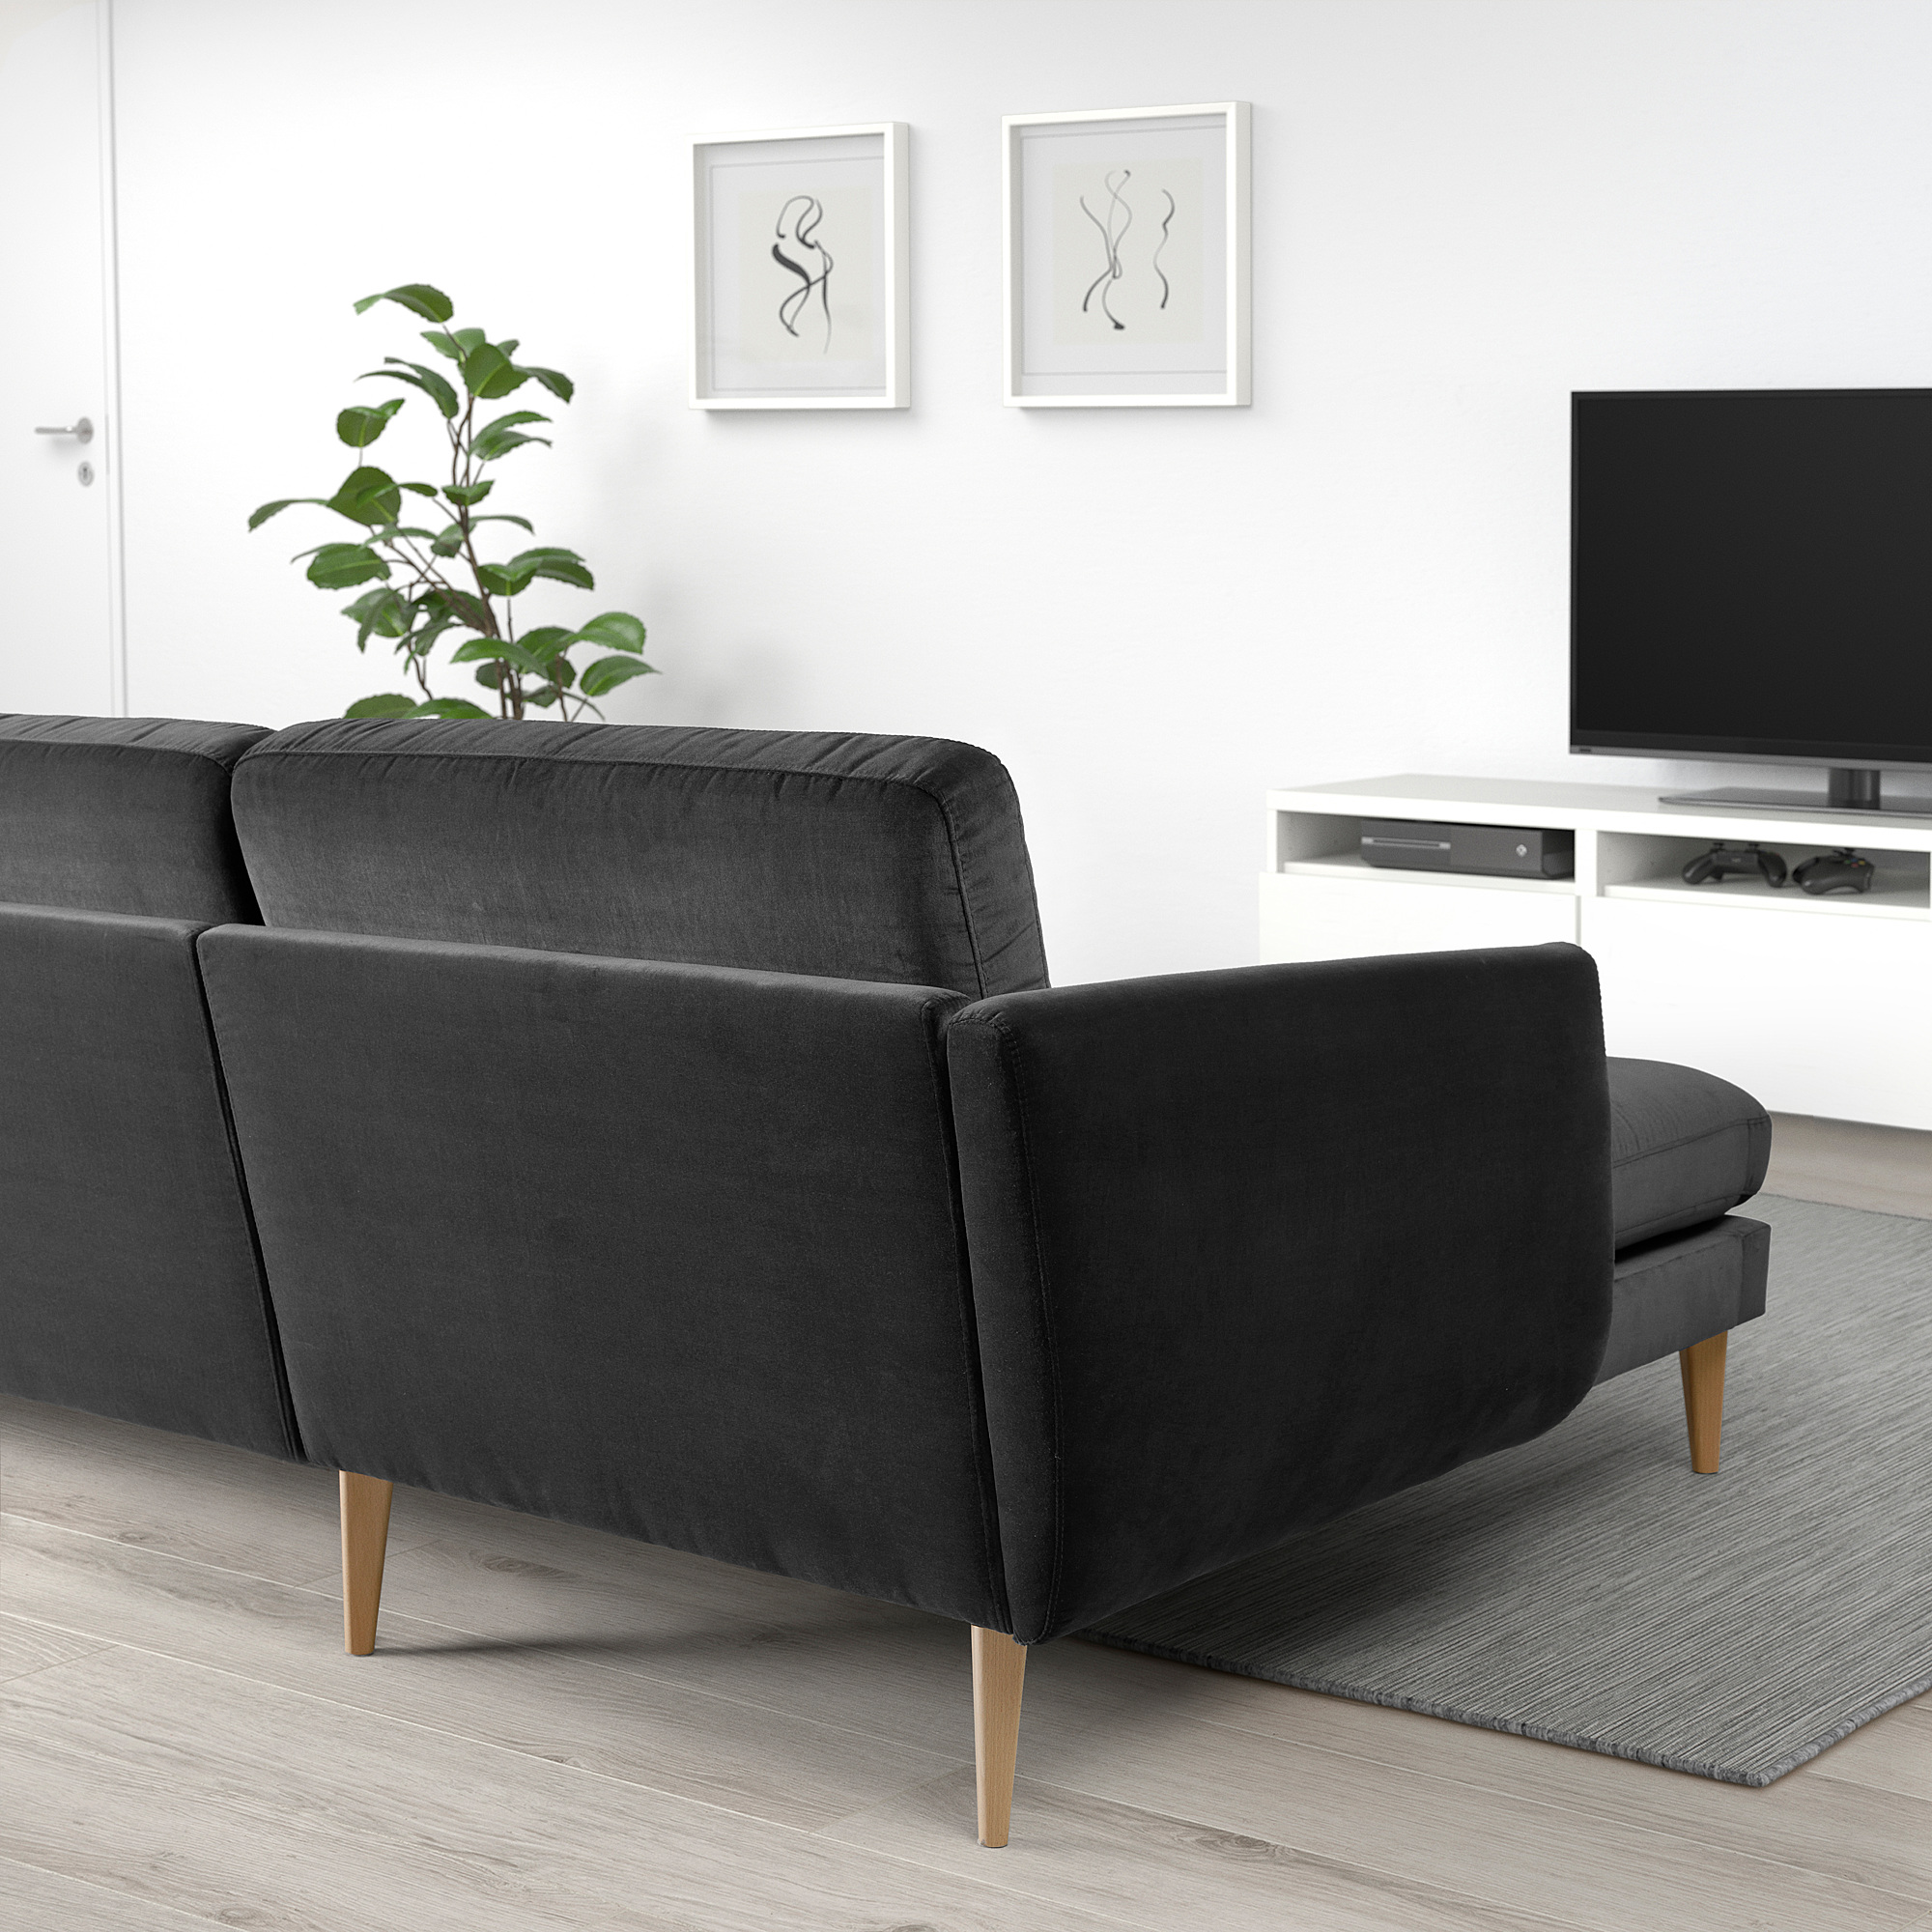 SMEDSTORP 4-seat sofa with chaise longue